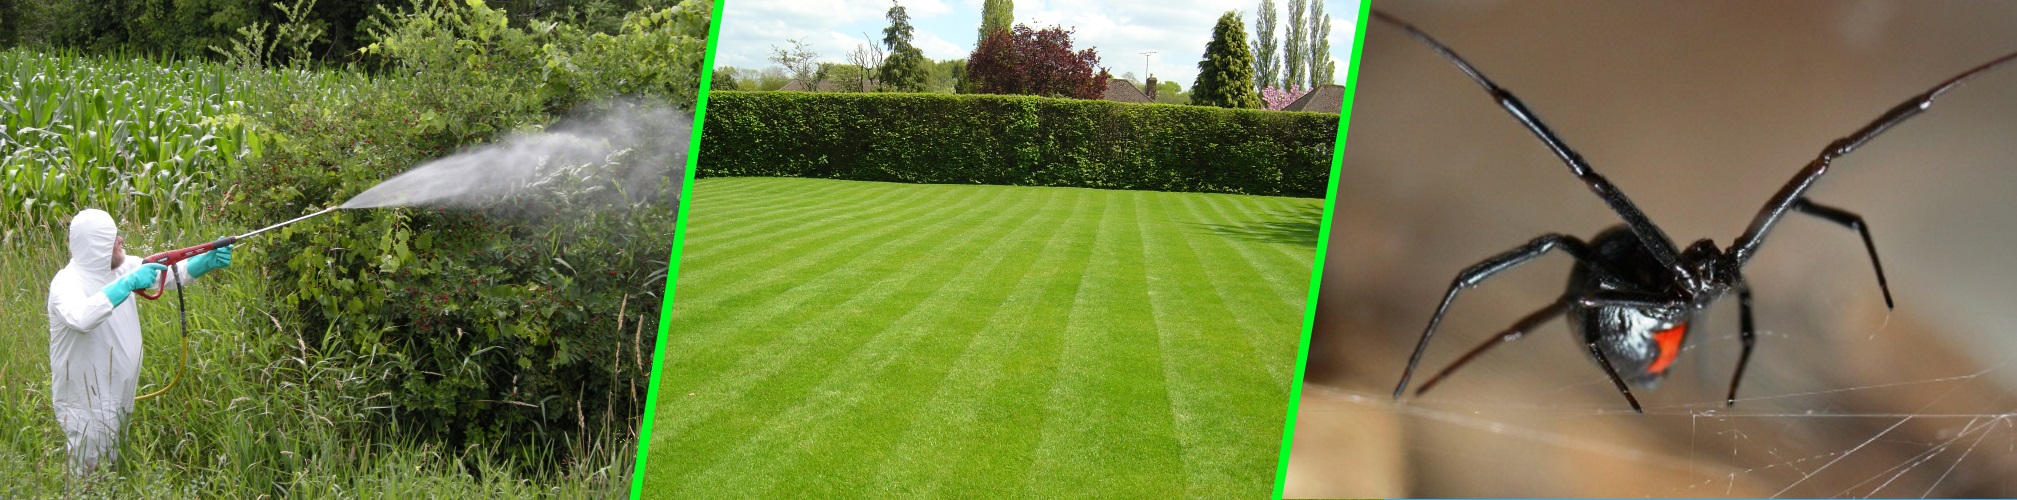 We offer lawn aeration services as well as shrub and tree pruning